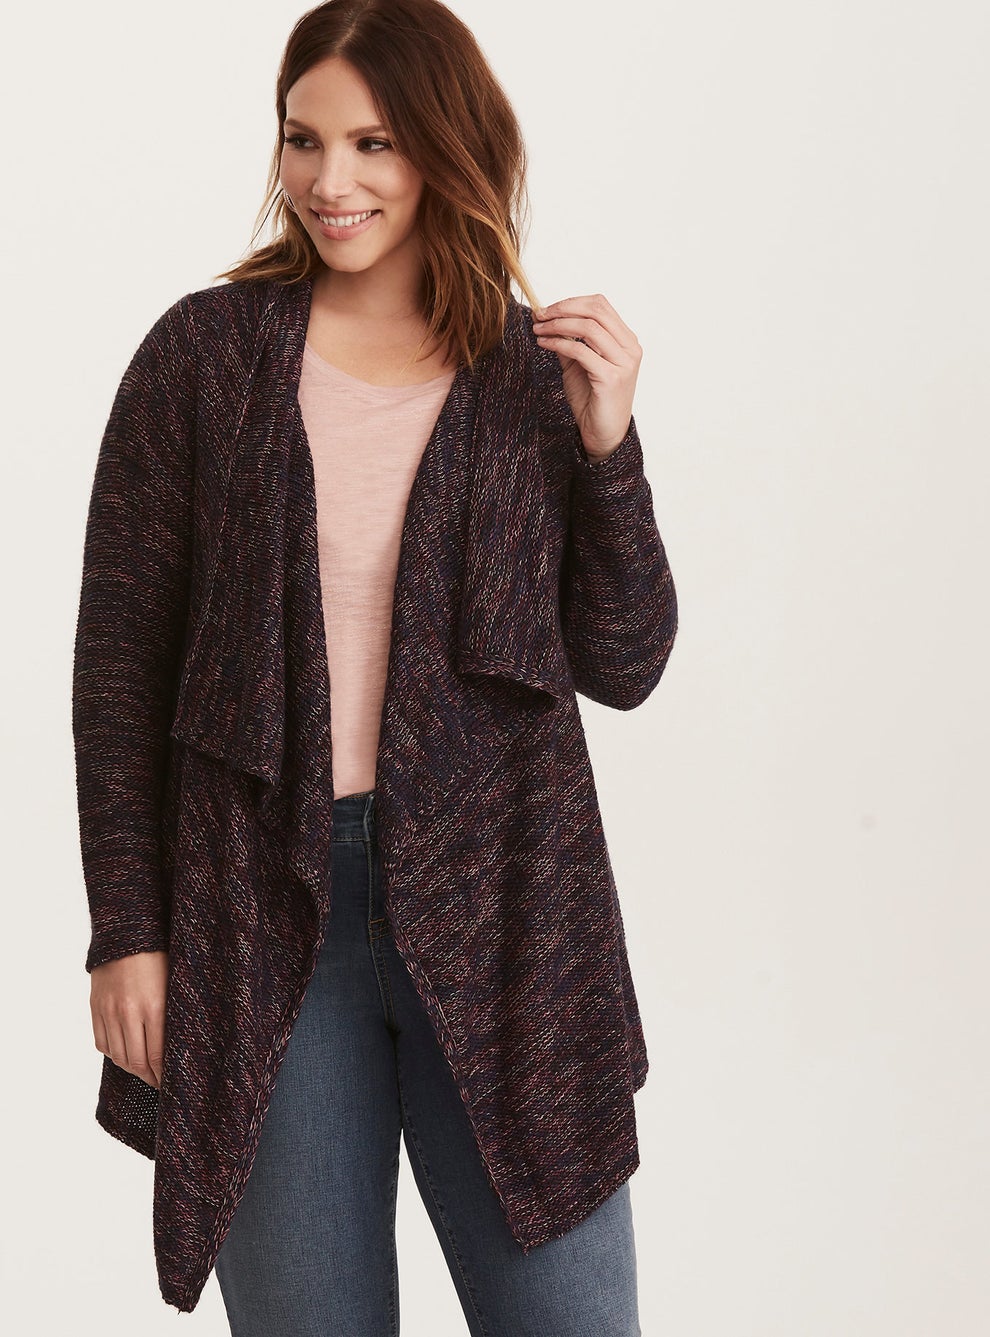 19 Of The Comfiest Things You'll Ever Wear